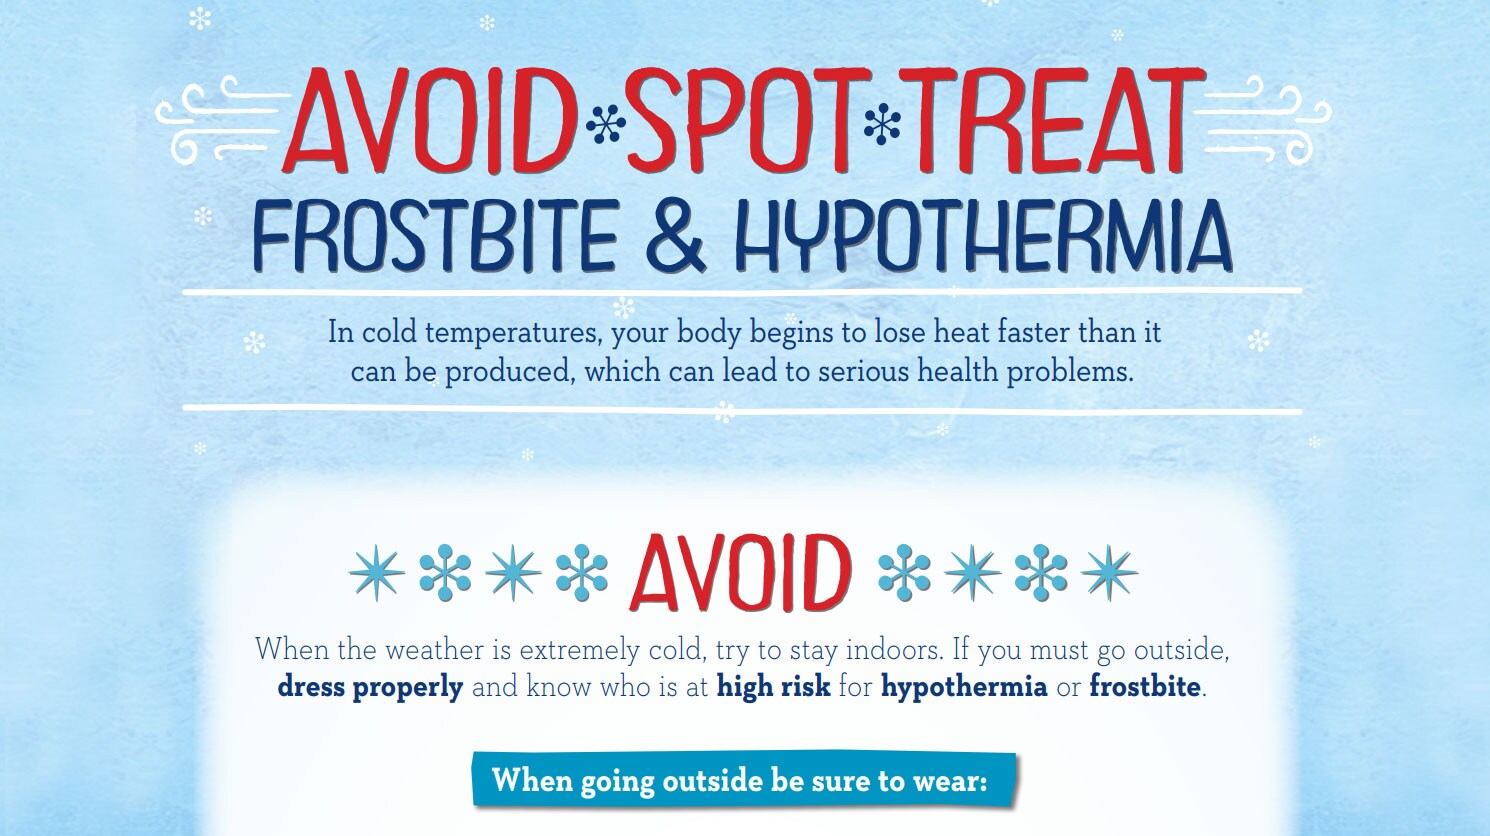 Learn how to avoid, spot and treat frostbite and hypothermia.